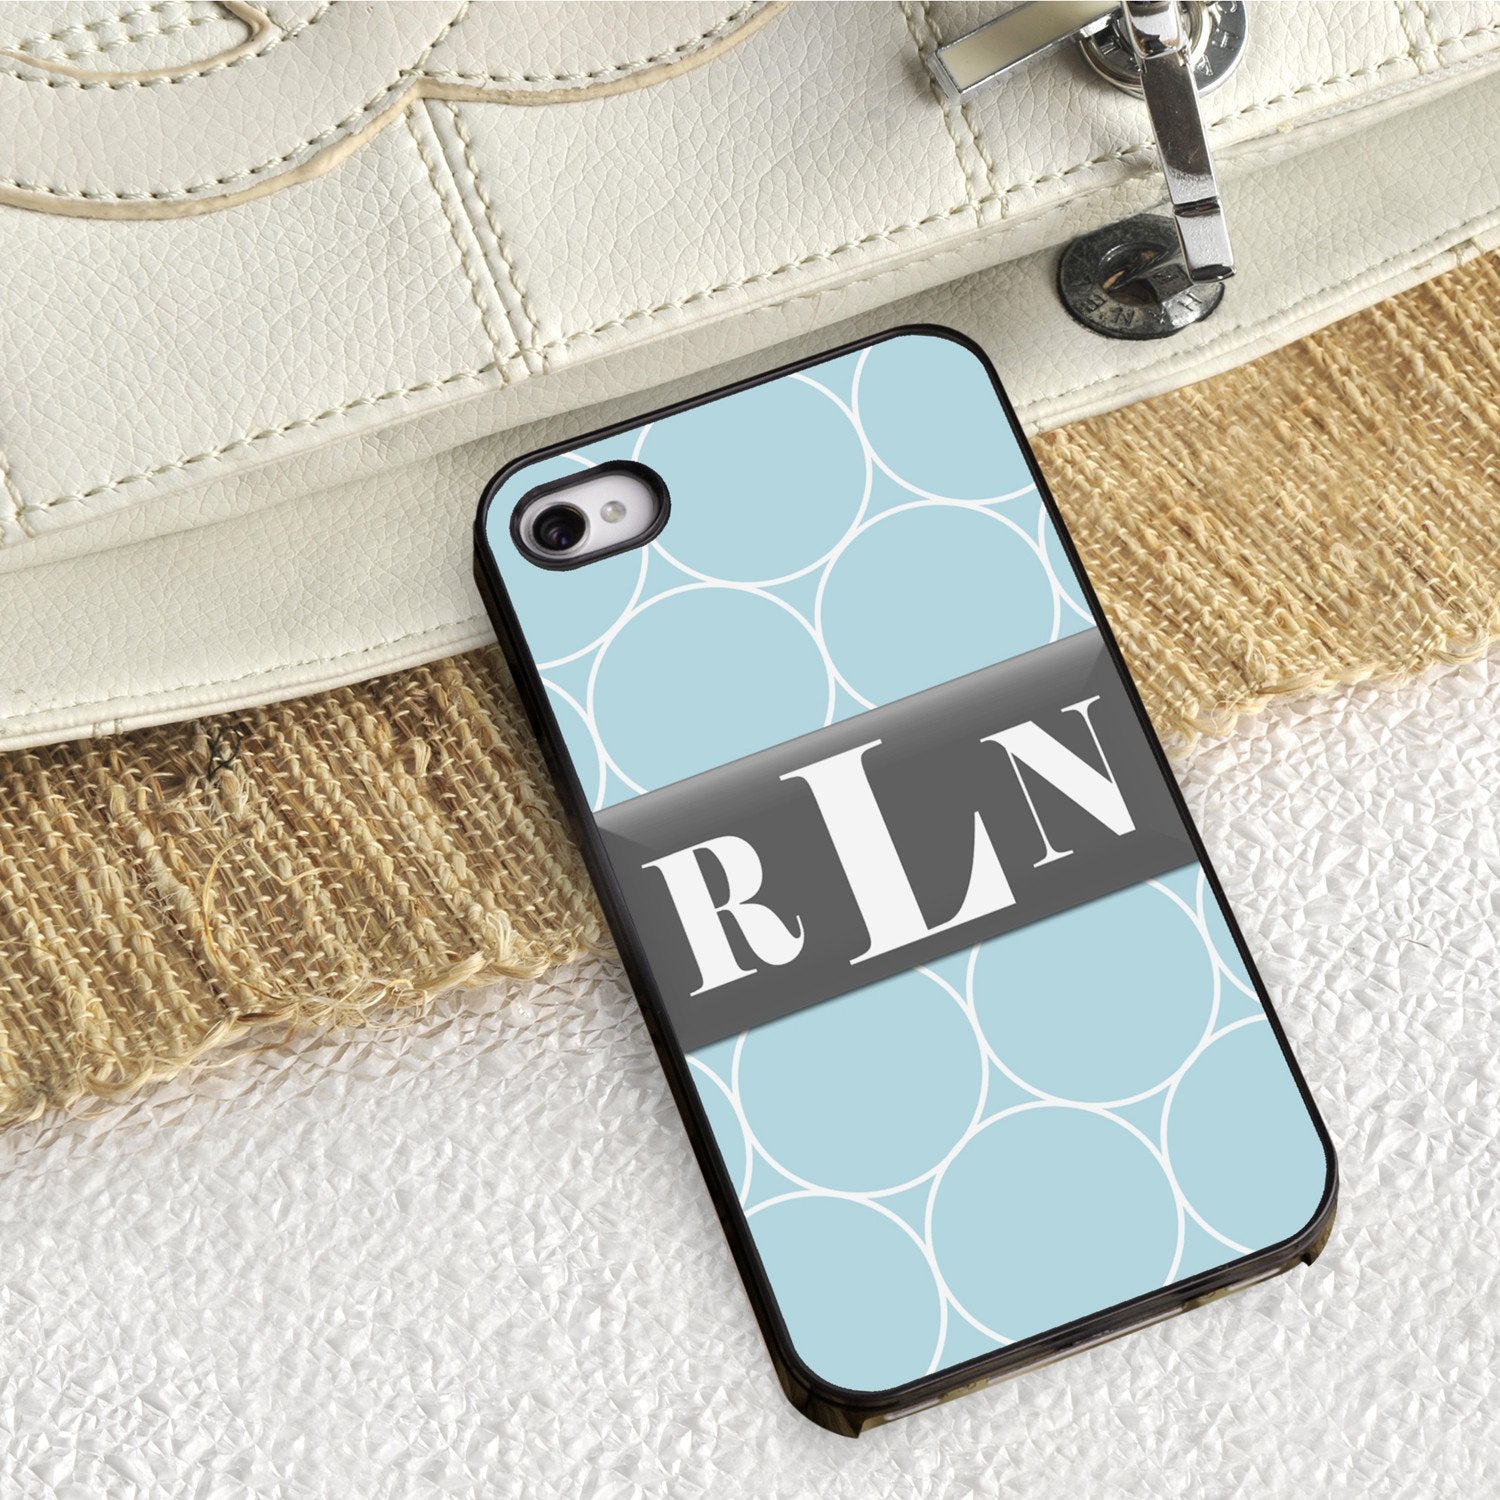 Personalized Black Trimmed iPhone Cover - 3 Initials